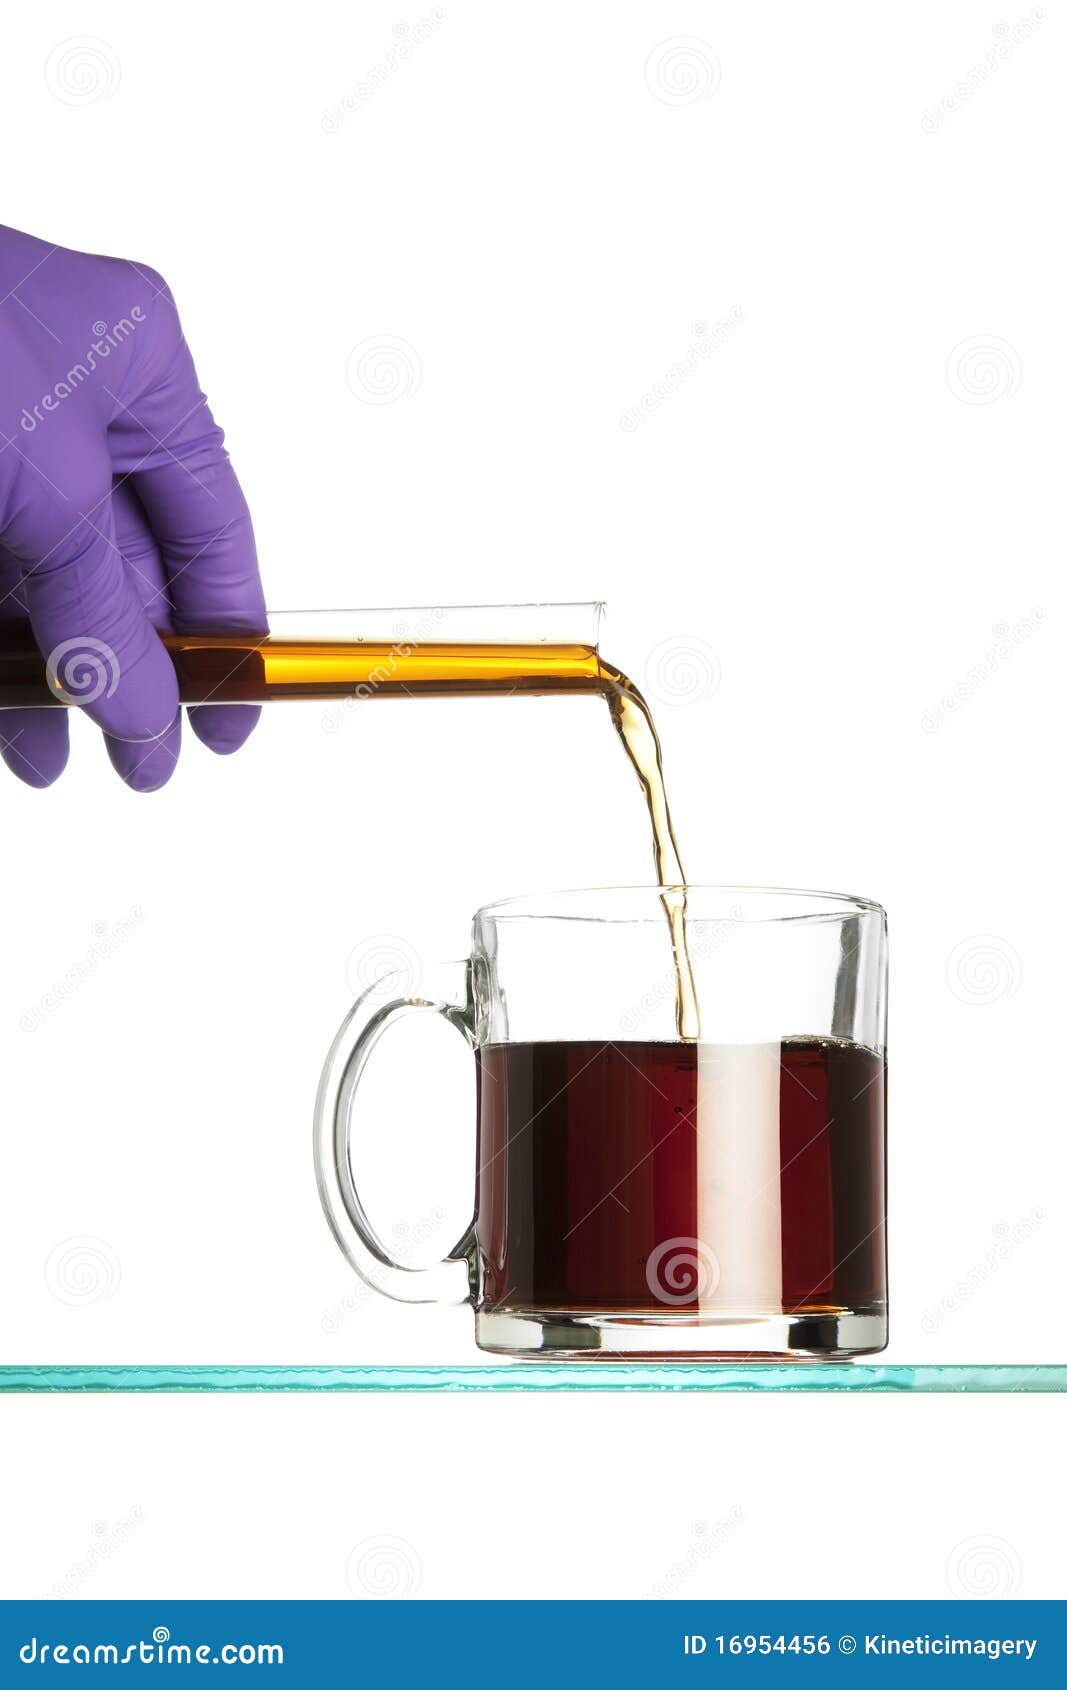 Download Pouring Coffee From Test Tube Royalty Free Stock Image - Image: 16954456